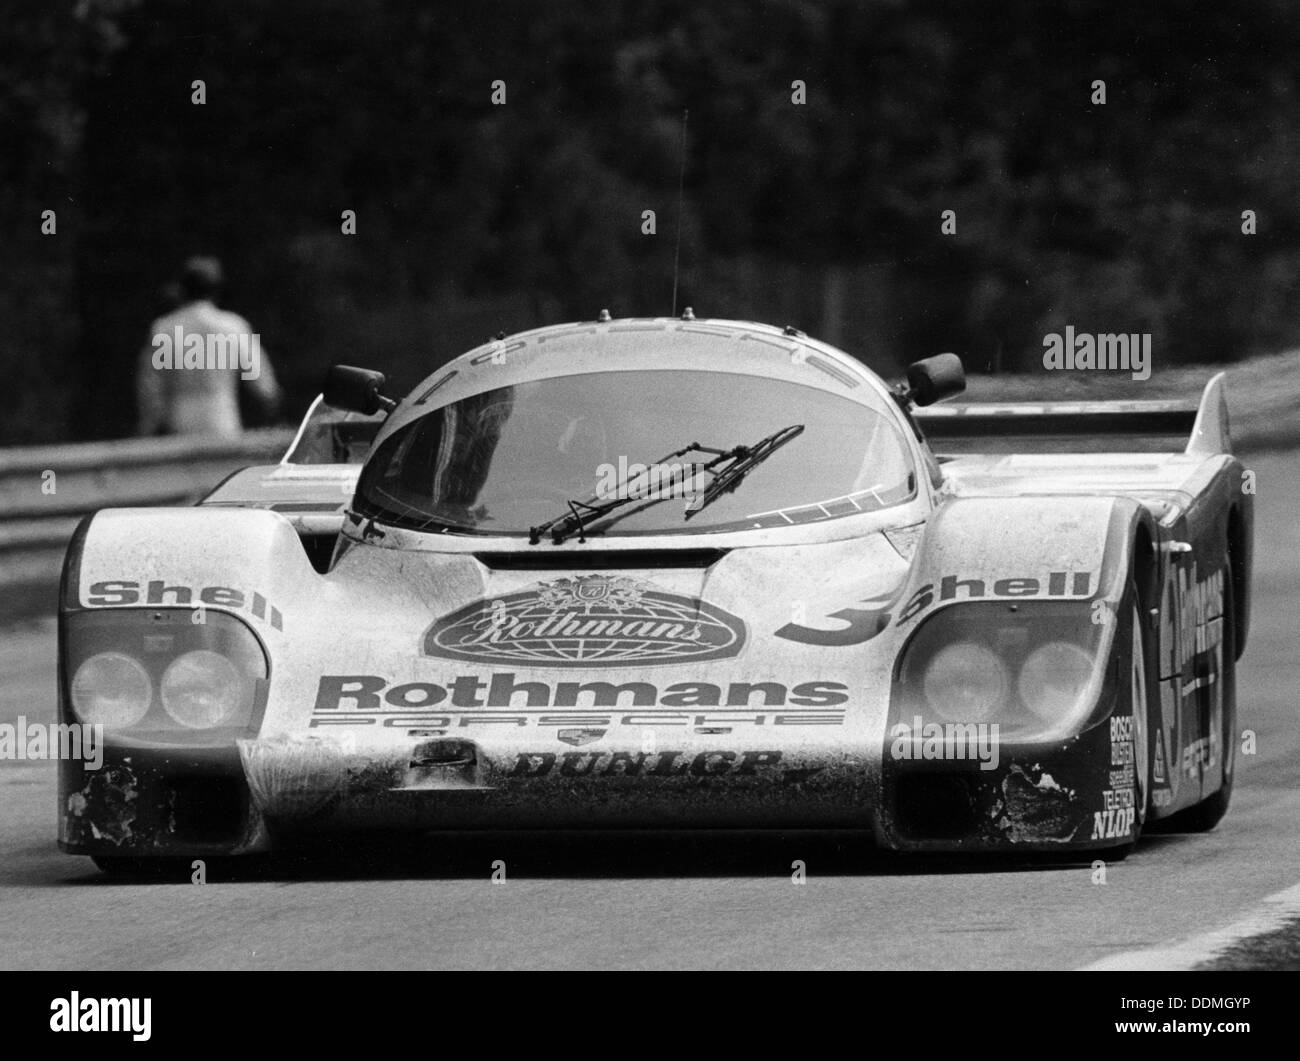 Porsche 956 on its way to winning the Le Mans 24 Hour Race, France, 1983. Artist: Unknown Stock Photo